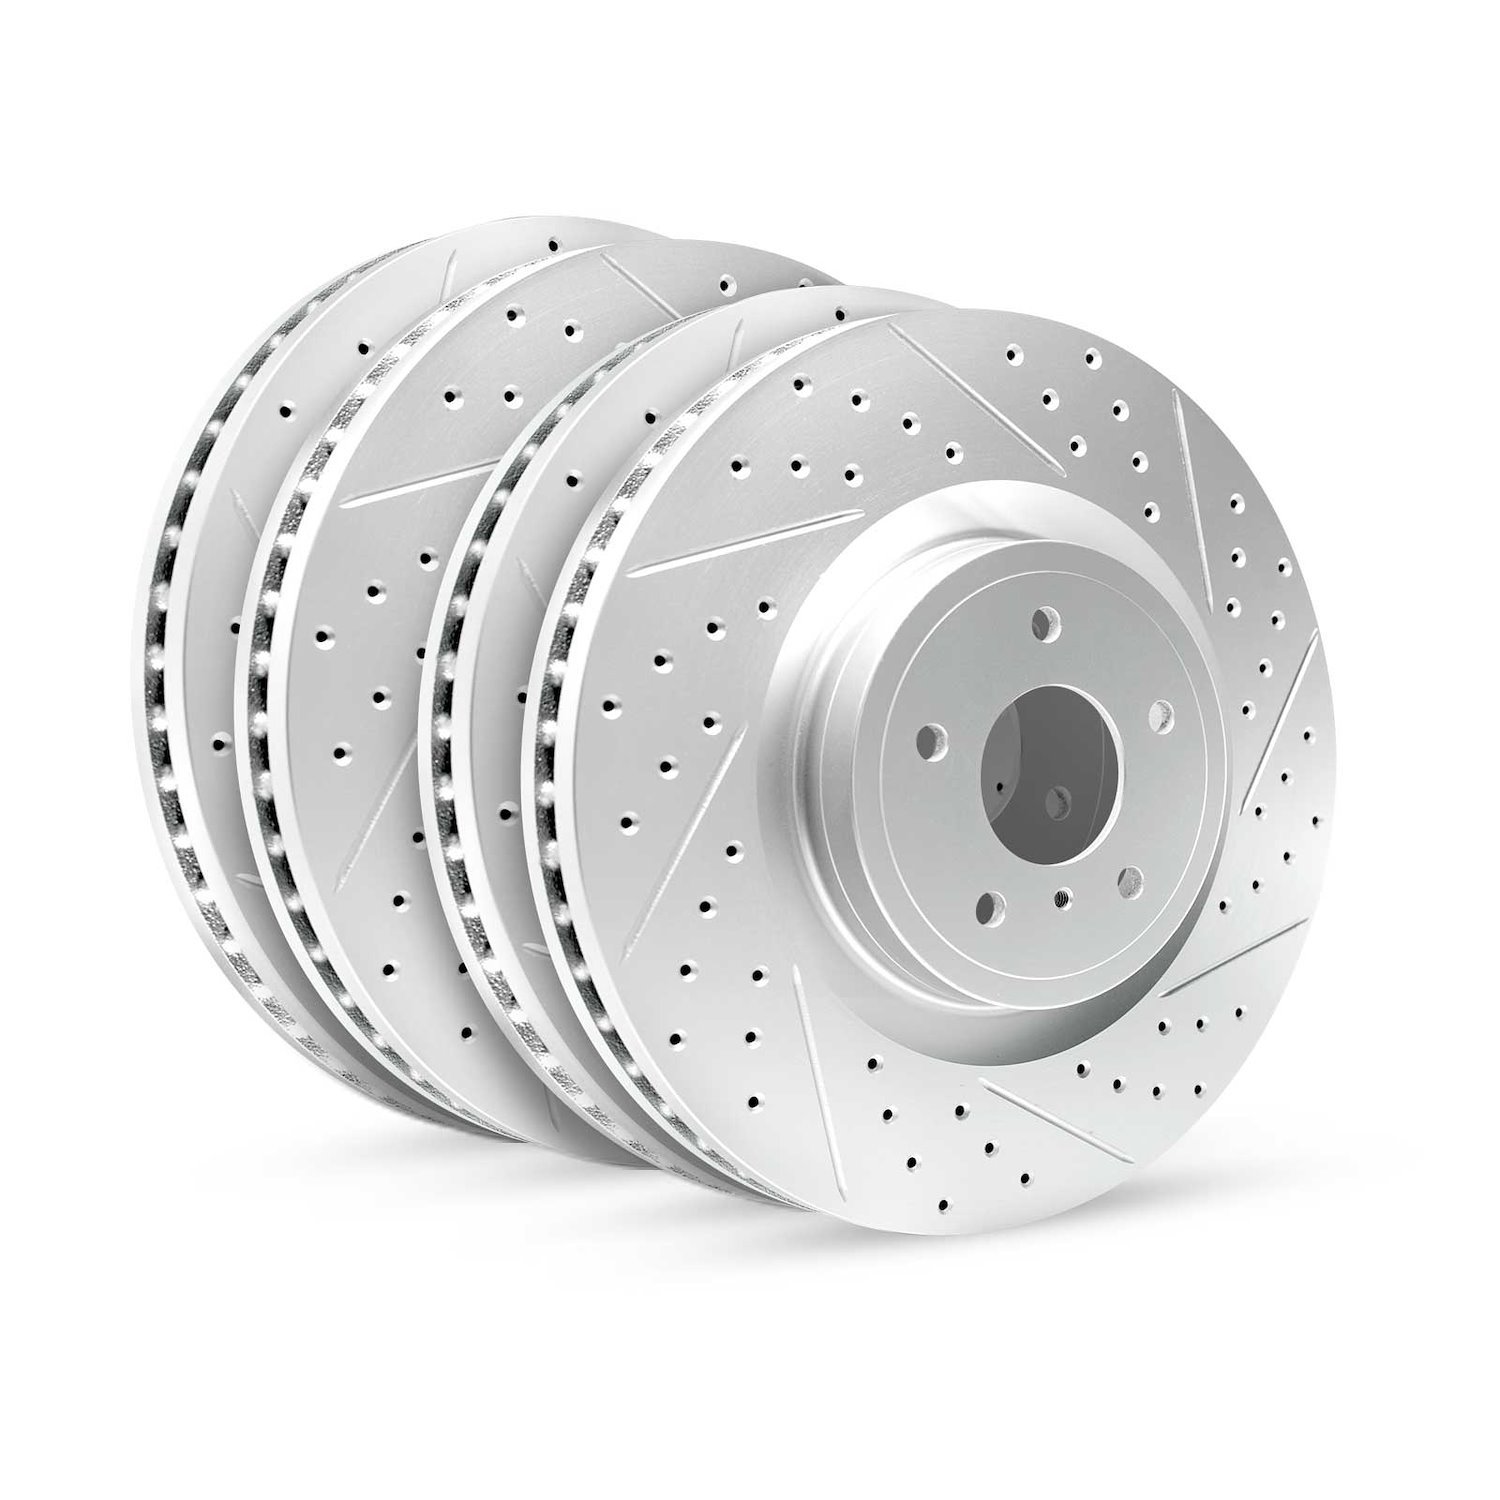 GEO-Carbon Drilled/Slotted Rotors, 2002-2006 BMW, Position: